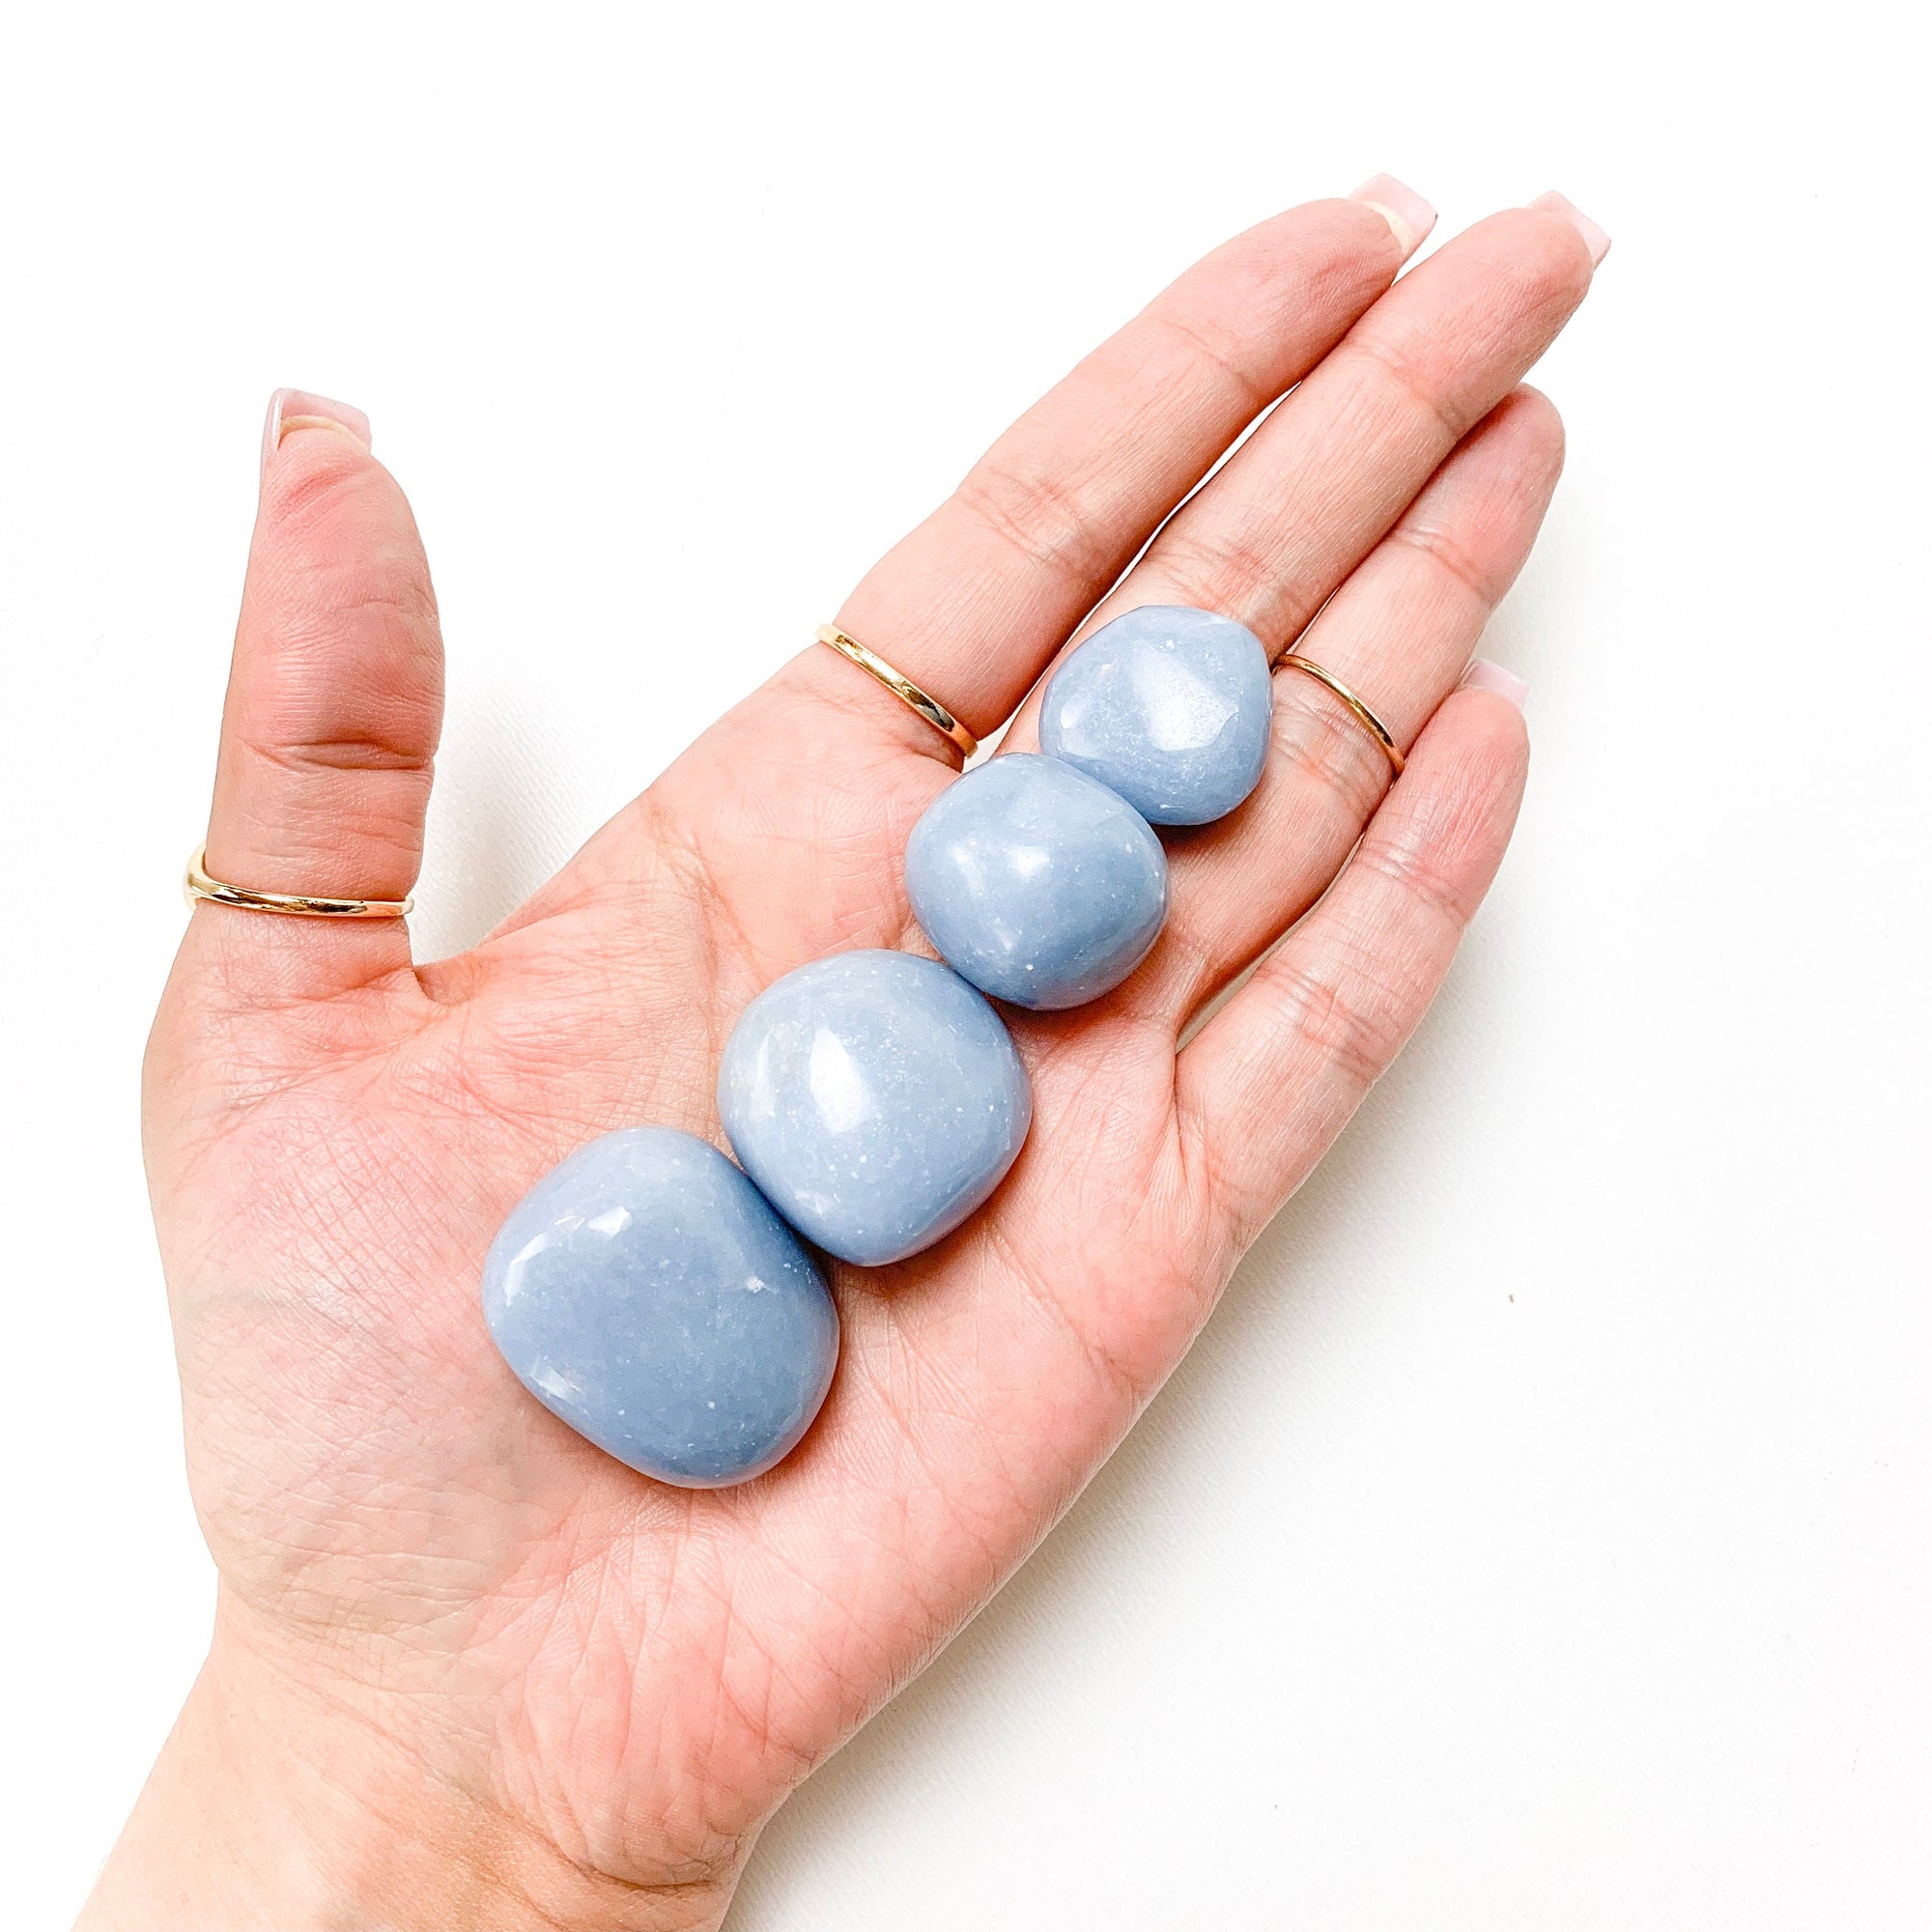 Angelite Tumbled Stones: A Complete Guide to Healing, Balance, and Spiritual Connection